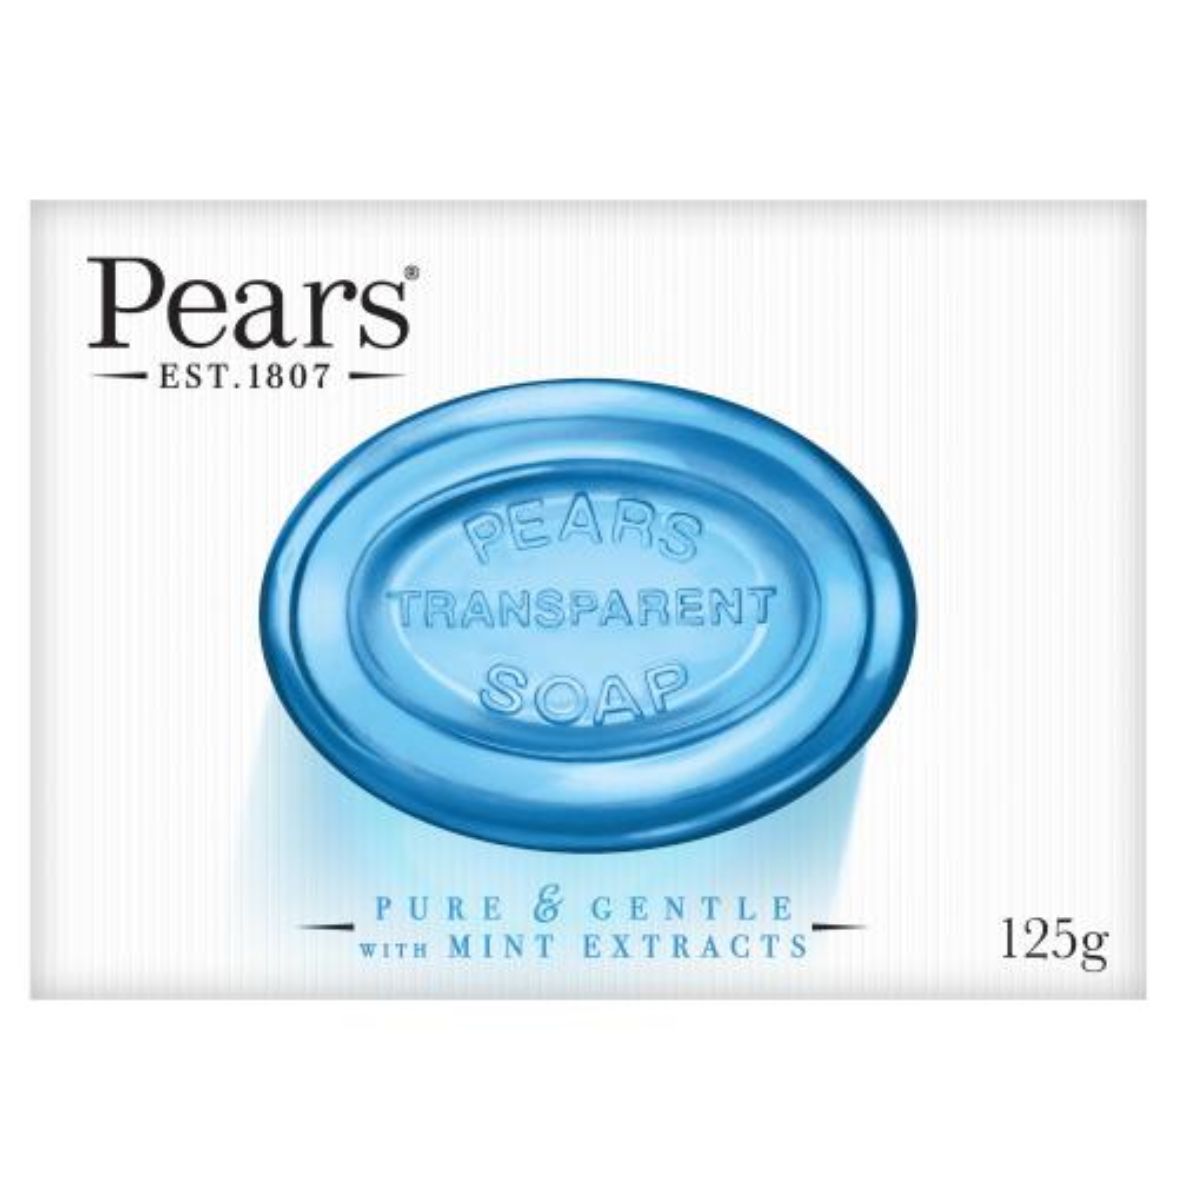 Pears - Transparent Soap - 125g with mint extracts.